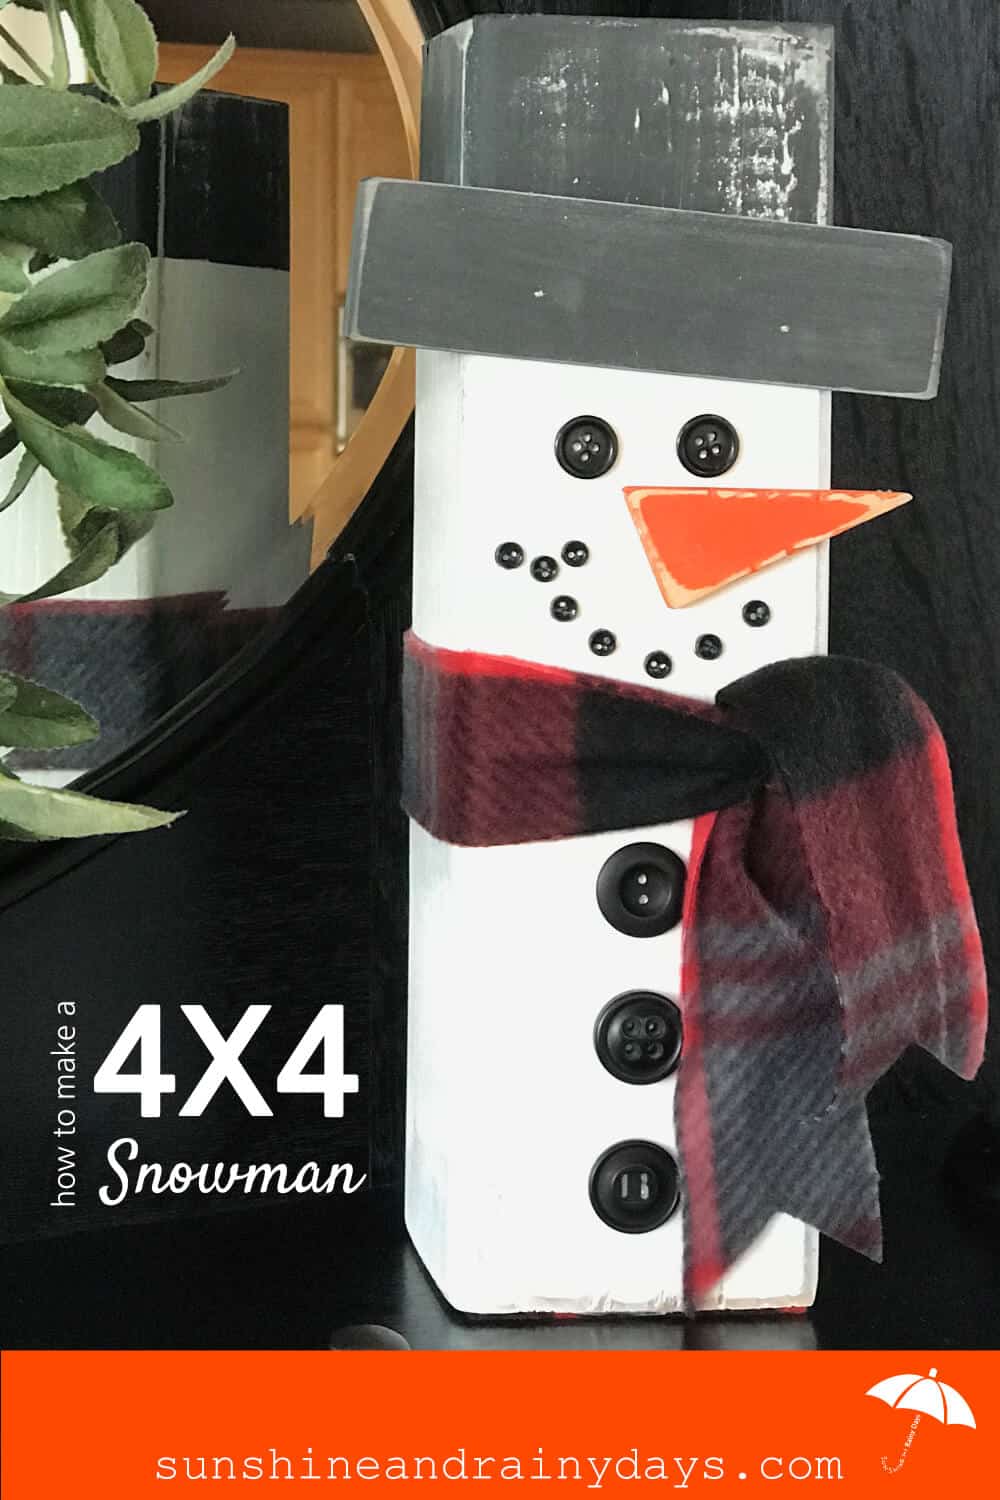 Making a 4 X 4 Snowman was a super fun project and we LOVE the end result! You never know if others will appreciate homemade decorative gifts but I think these are pretty cool! #4x4snowman #ChristmasDecoration #ChristmasDIY